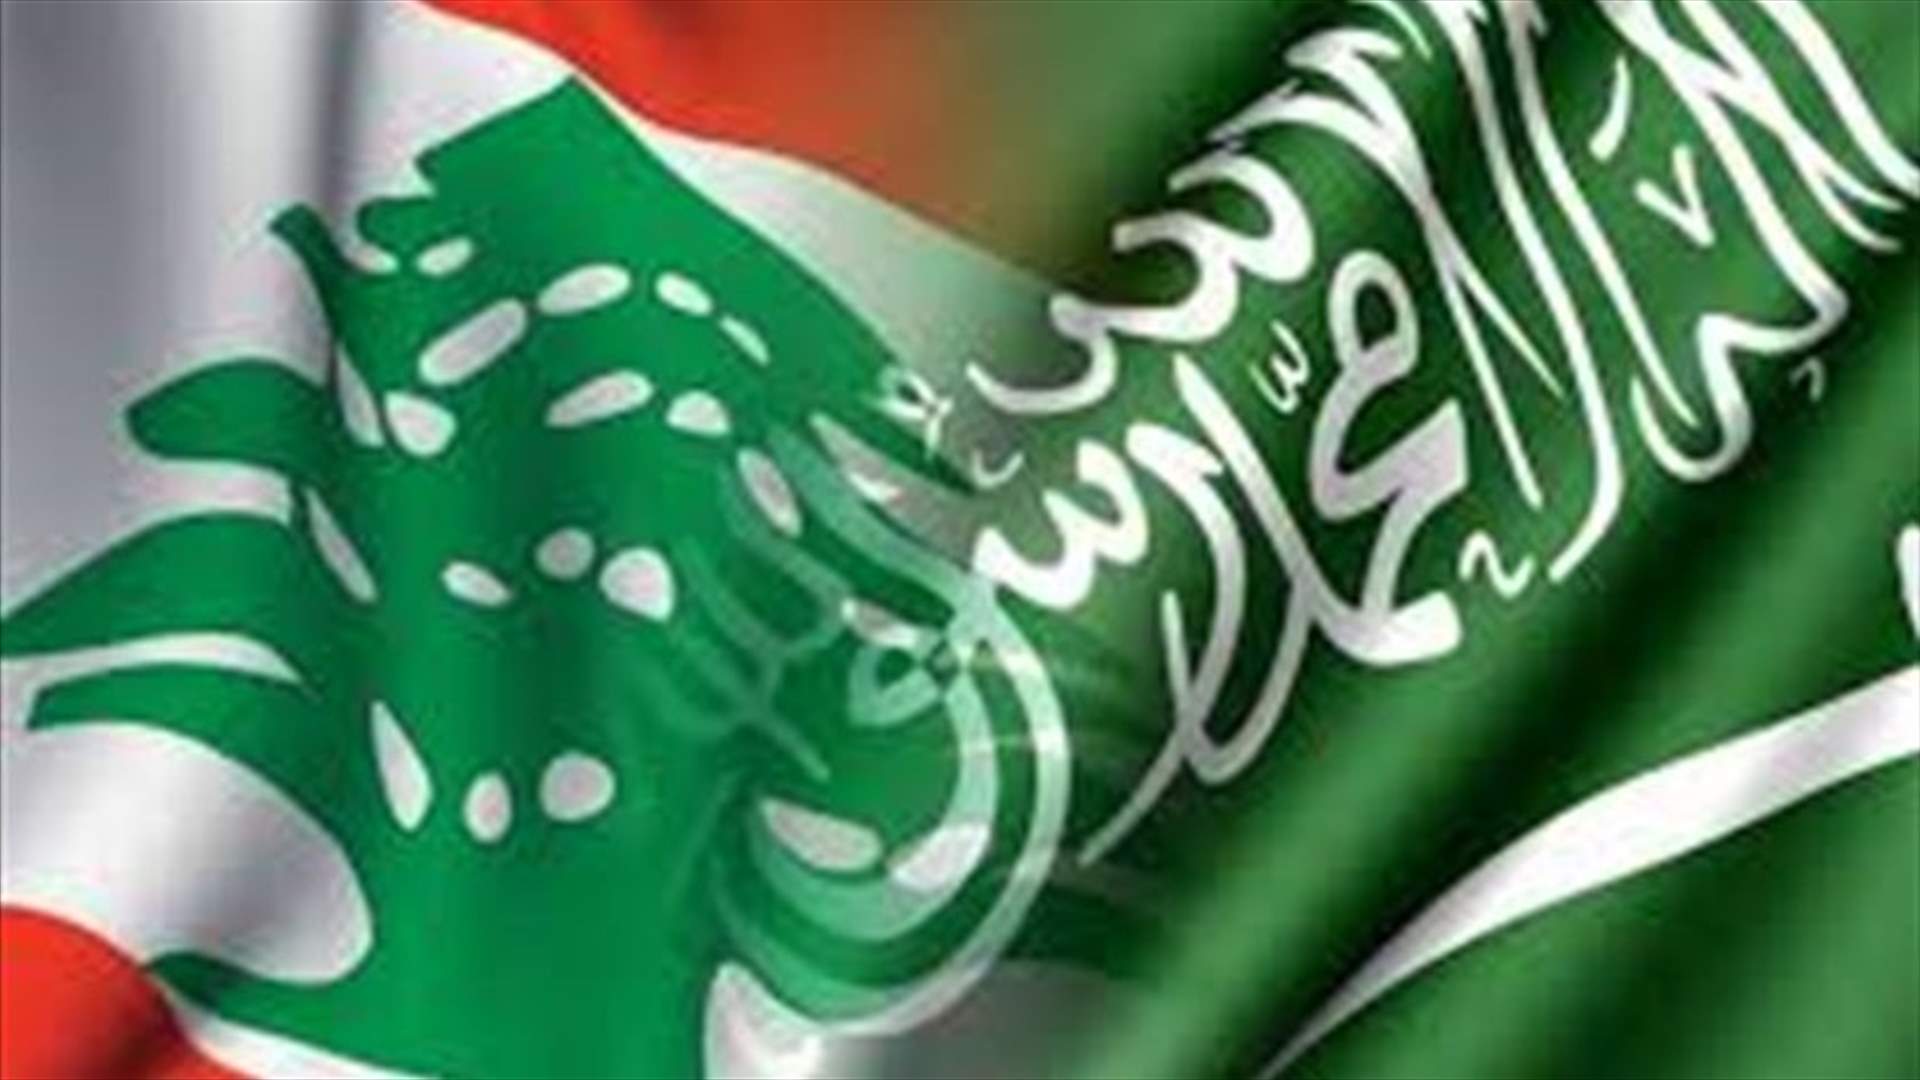 Saudi finance minister: We are in talks with the Lebanese government on financial support